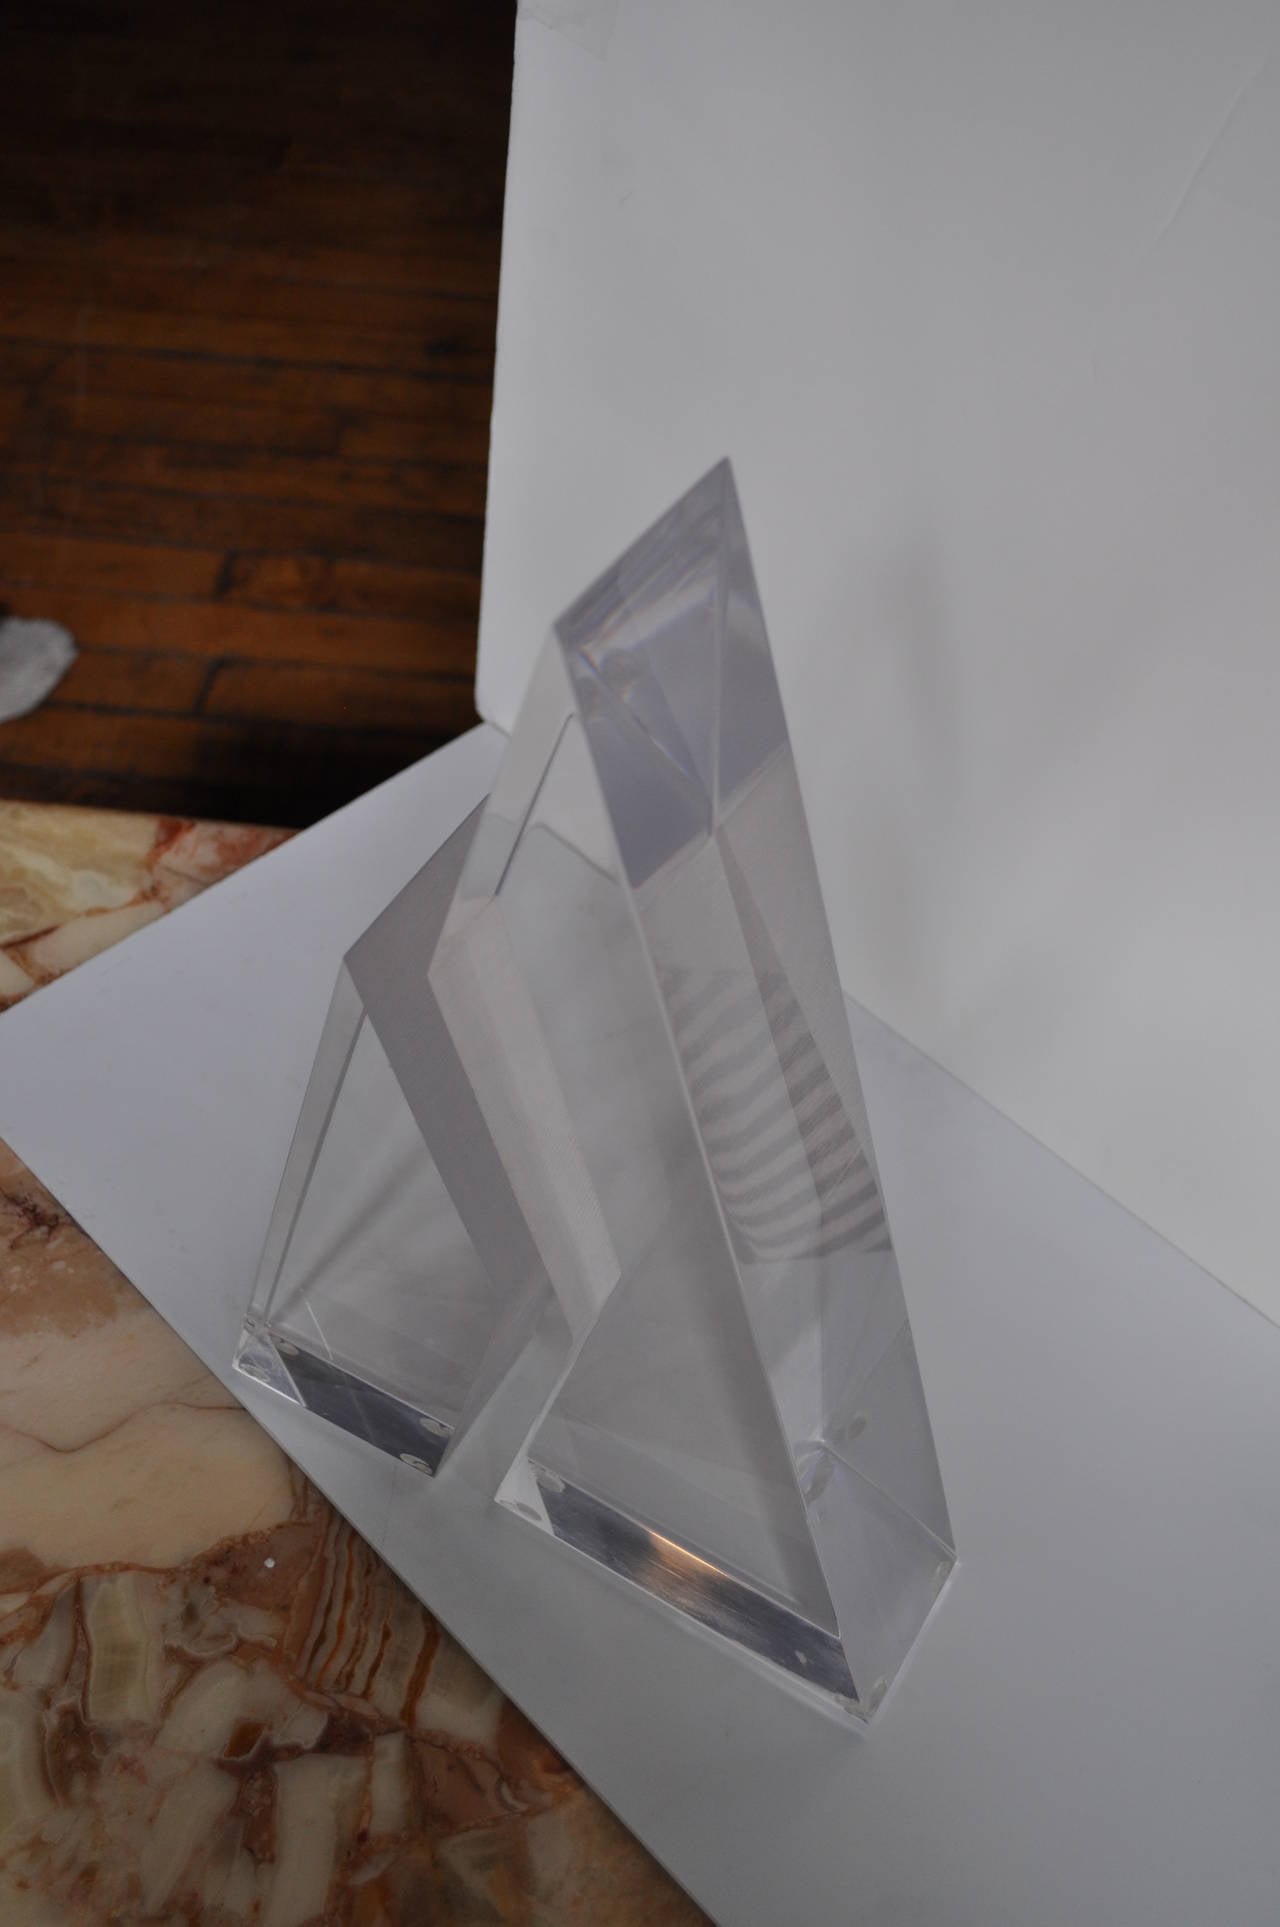 Thick two piece clear Lucite triangular sculpture.